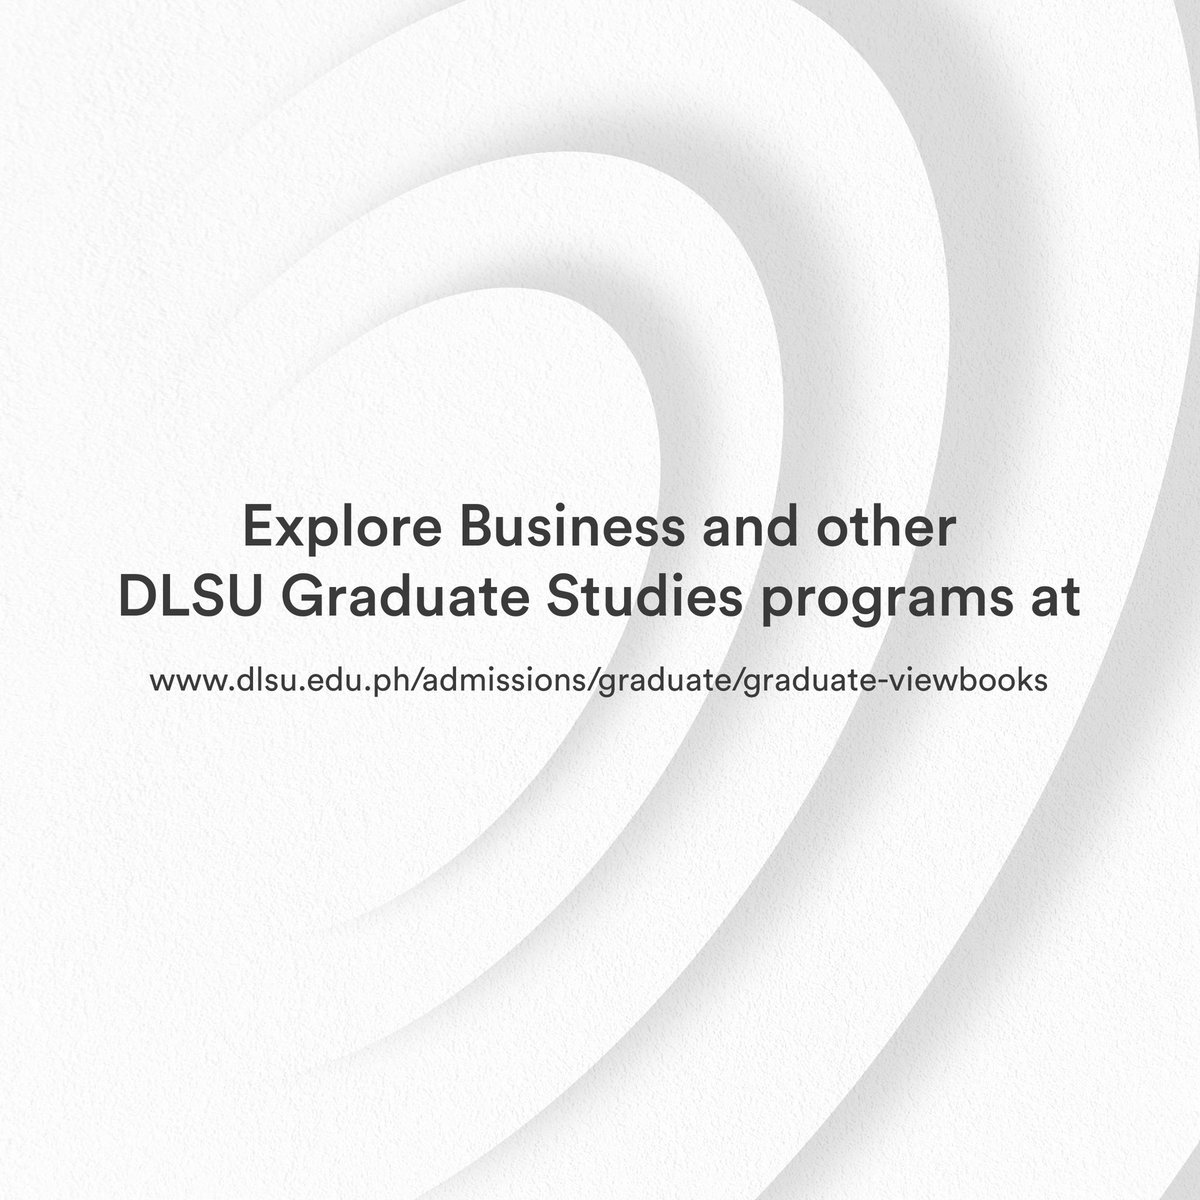 Explore DLSU graduate business programs and build a career with impact. Application for Term 2, A.Y. 2023-24 is open until October 14. Apply online @ dlsu.edu.ph/admissions/gra… *** De La Salle University Graduate Studies Beyond higher learning.®